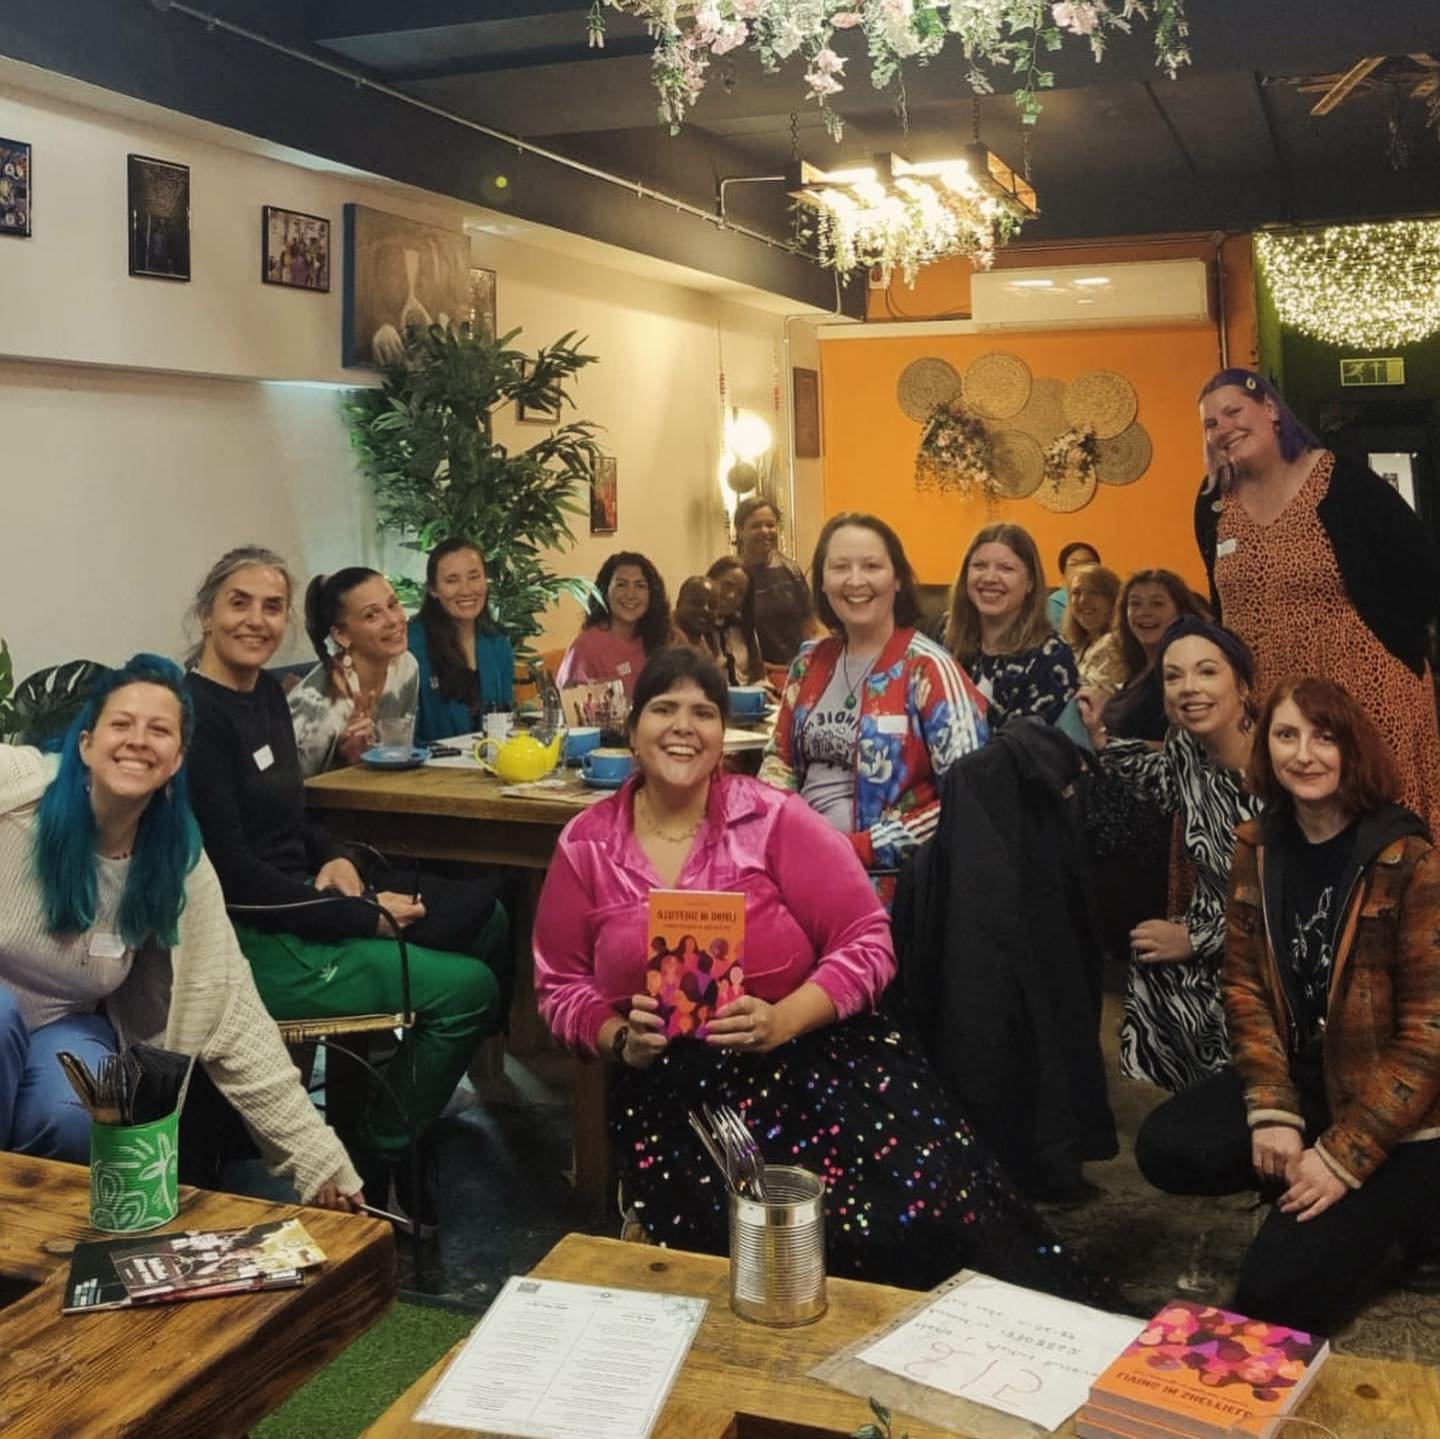 After a challenging few days last week moving ALL Hop Hideout&rsquo;s stock and equipment into cold storage and closing the foodhall location, the @livinginsheffield Women in Business coffee morning event organised by @liviabarreiraonline was somethi